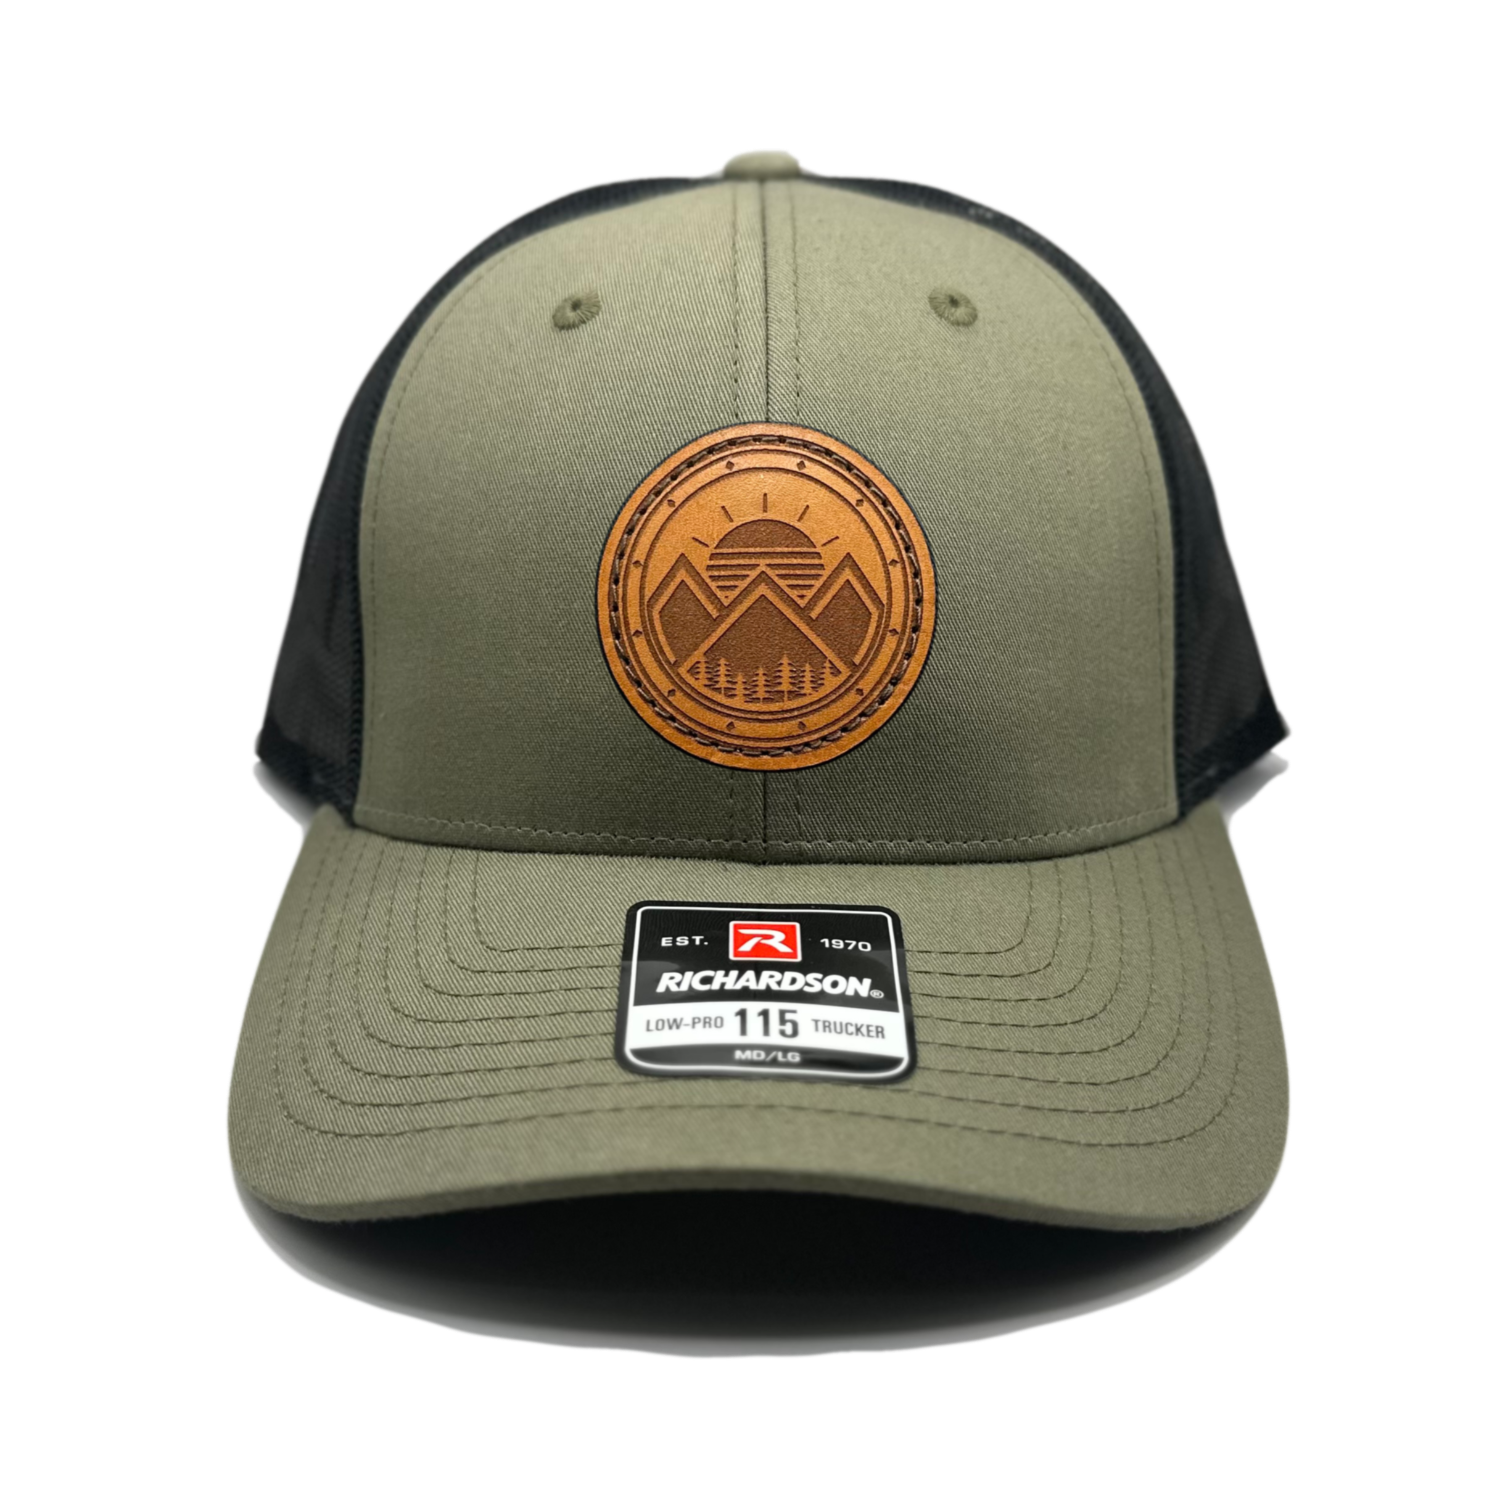 A trendy leather patch hat named Modern Mountains, boasting a unique design with three mountain peaks, a sunrise, pine trees, and a decorative border on a circular patch. Crafted and designed in the USA, this authentic leather patch is skillfully sewn onto a SnapBack adjustable hat. Offered in small and m/l sizes in the Richardson 115 style, as well as multiple colors in the Richardson 112. Inspired by the picturesque surroundings of our Colorado mountain location, this hat is perfect for fashion-forward in